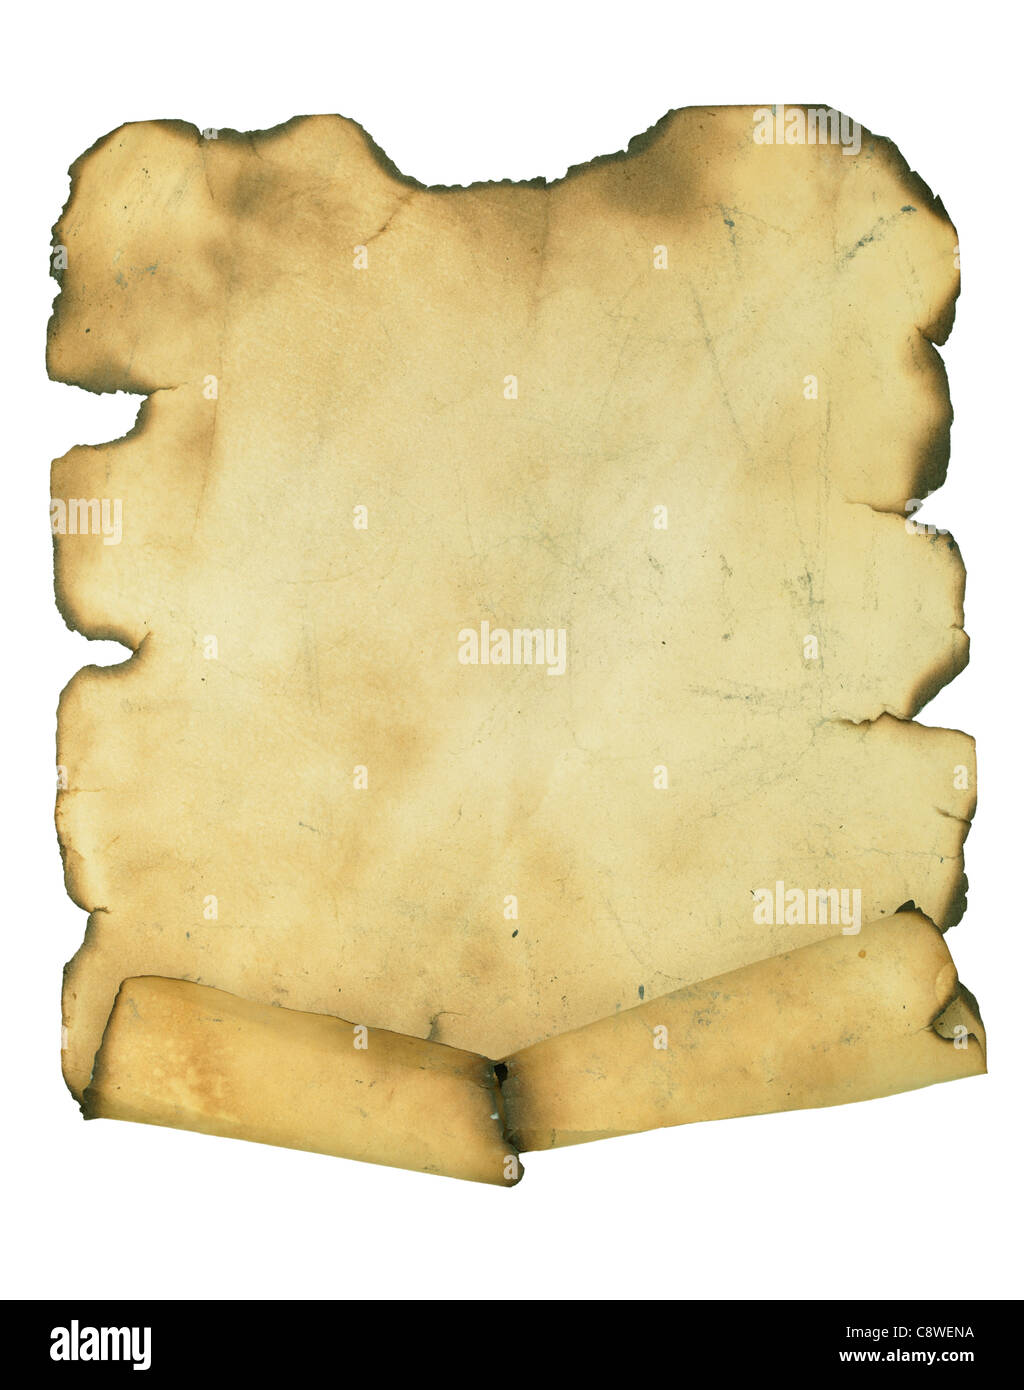 Burnt manuscript isolated over a white background Stock Photo